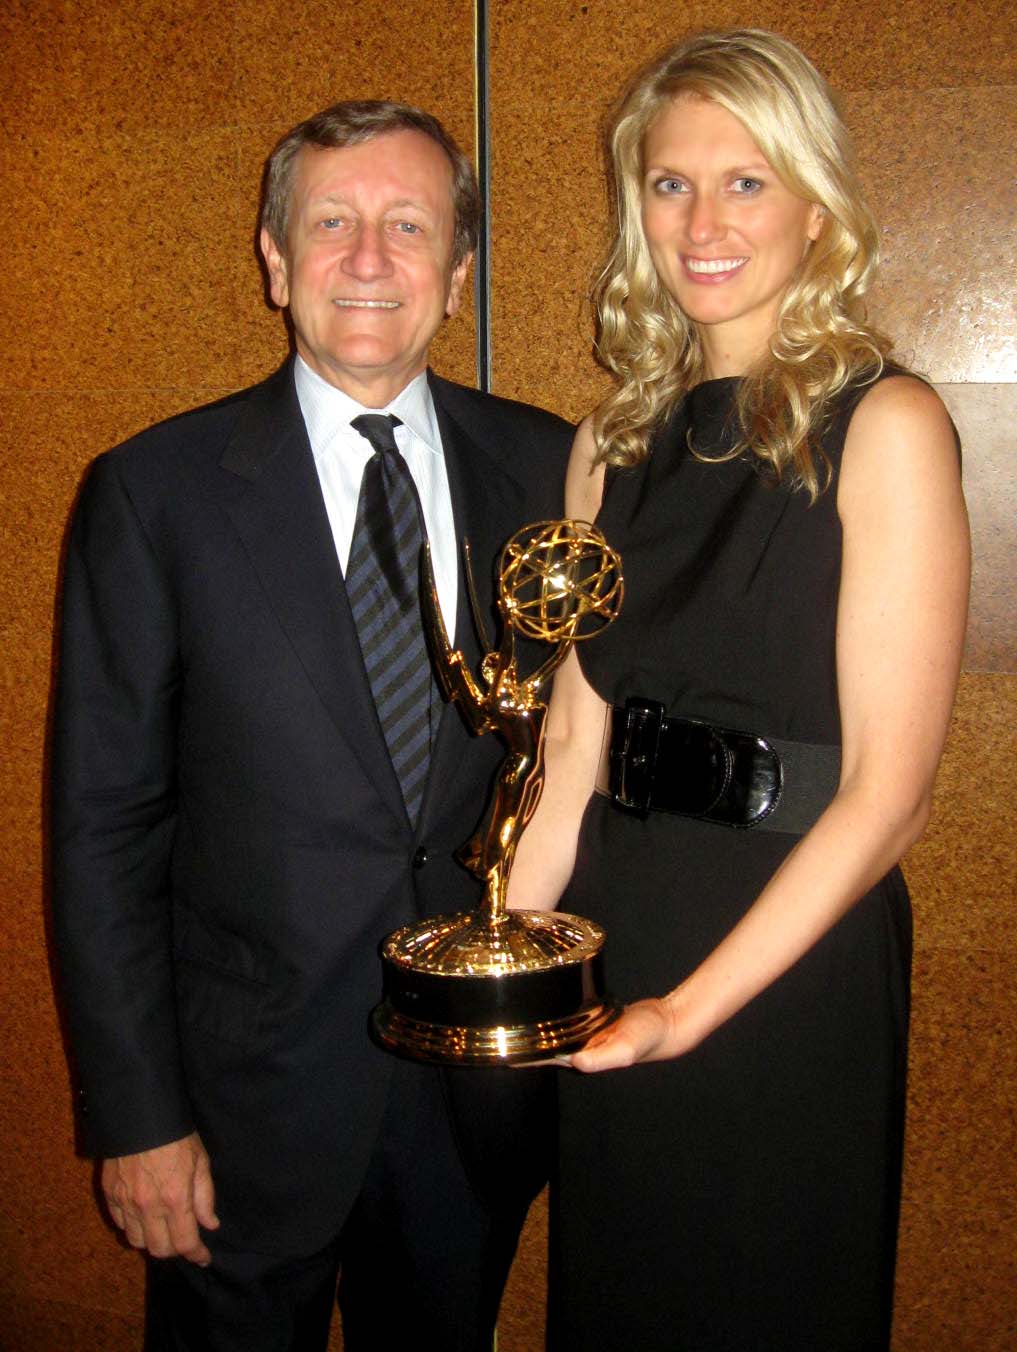 annaschecterbrianross - 2012 NY EMMY AWARDS BRING OUT ELECTION CONCERN